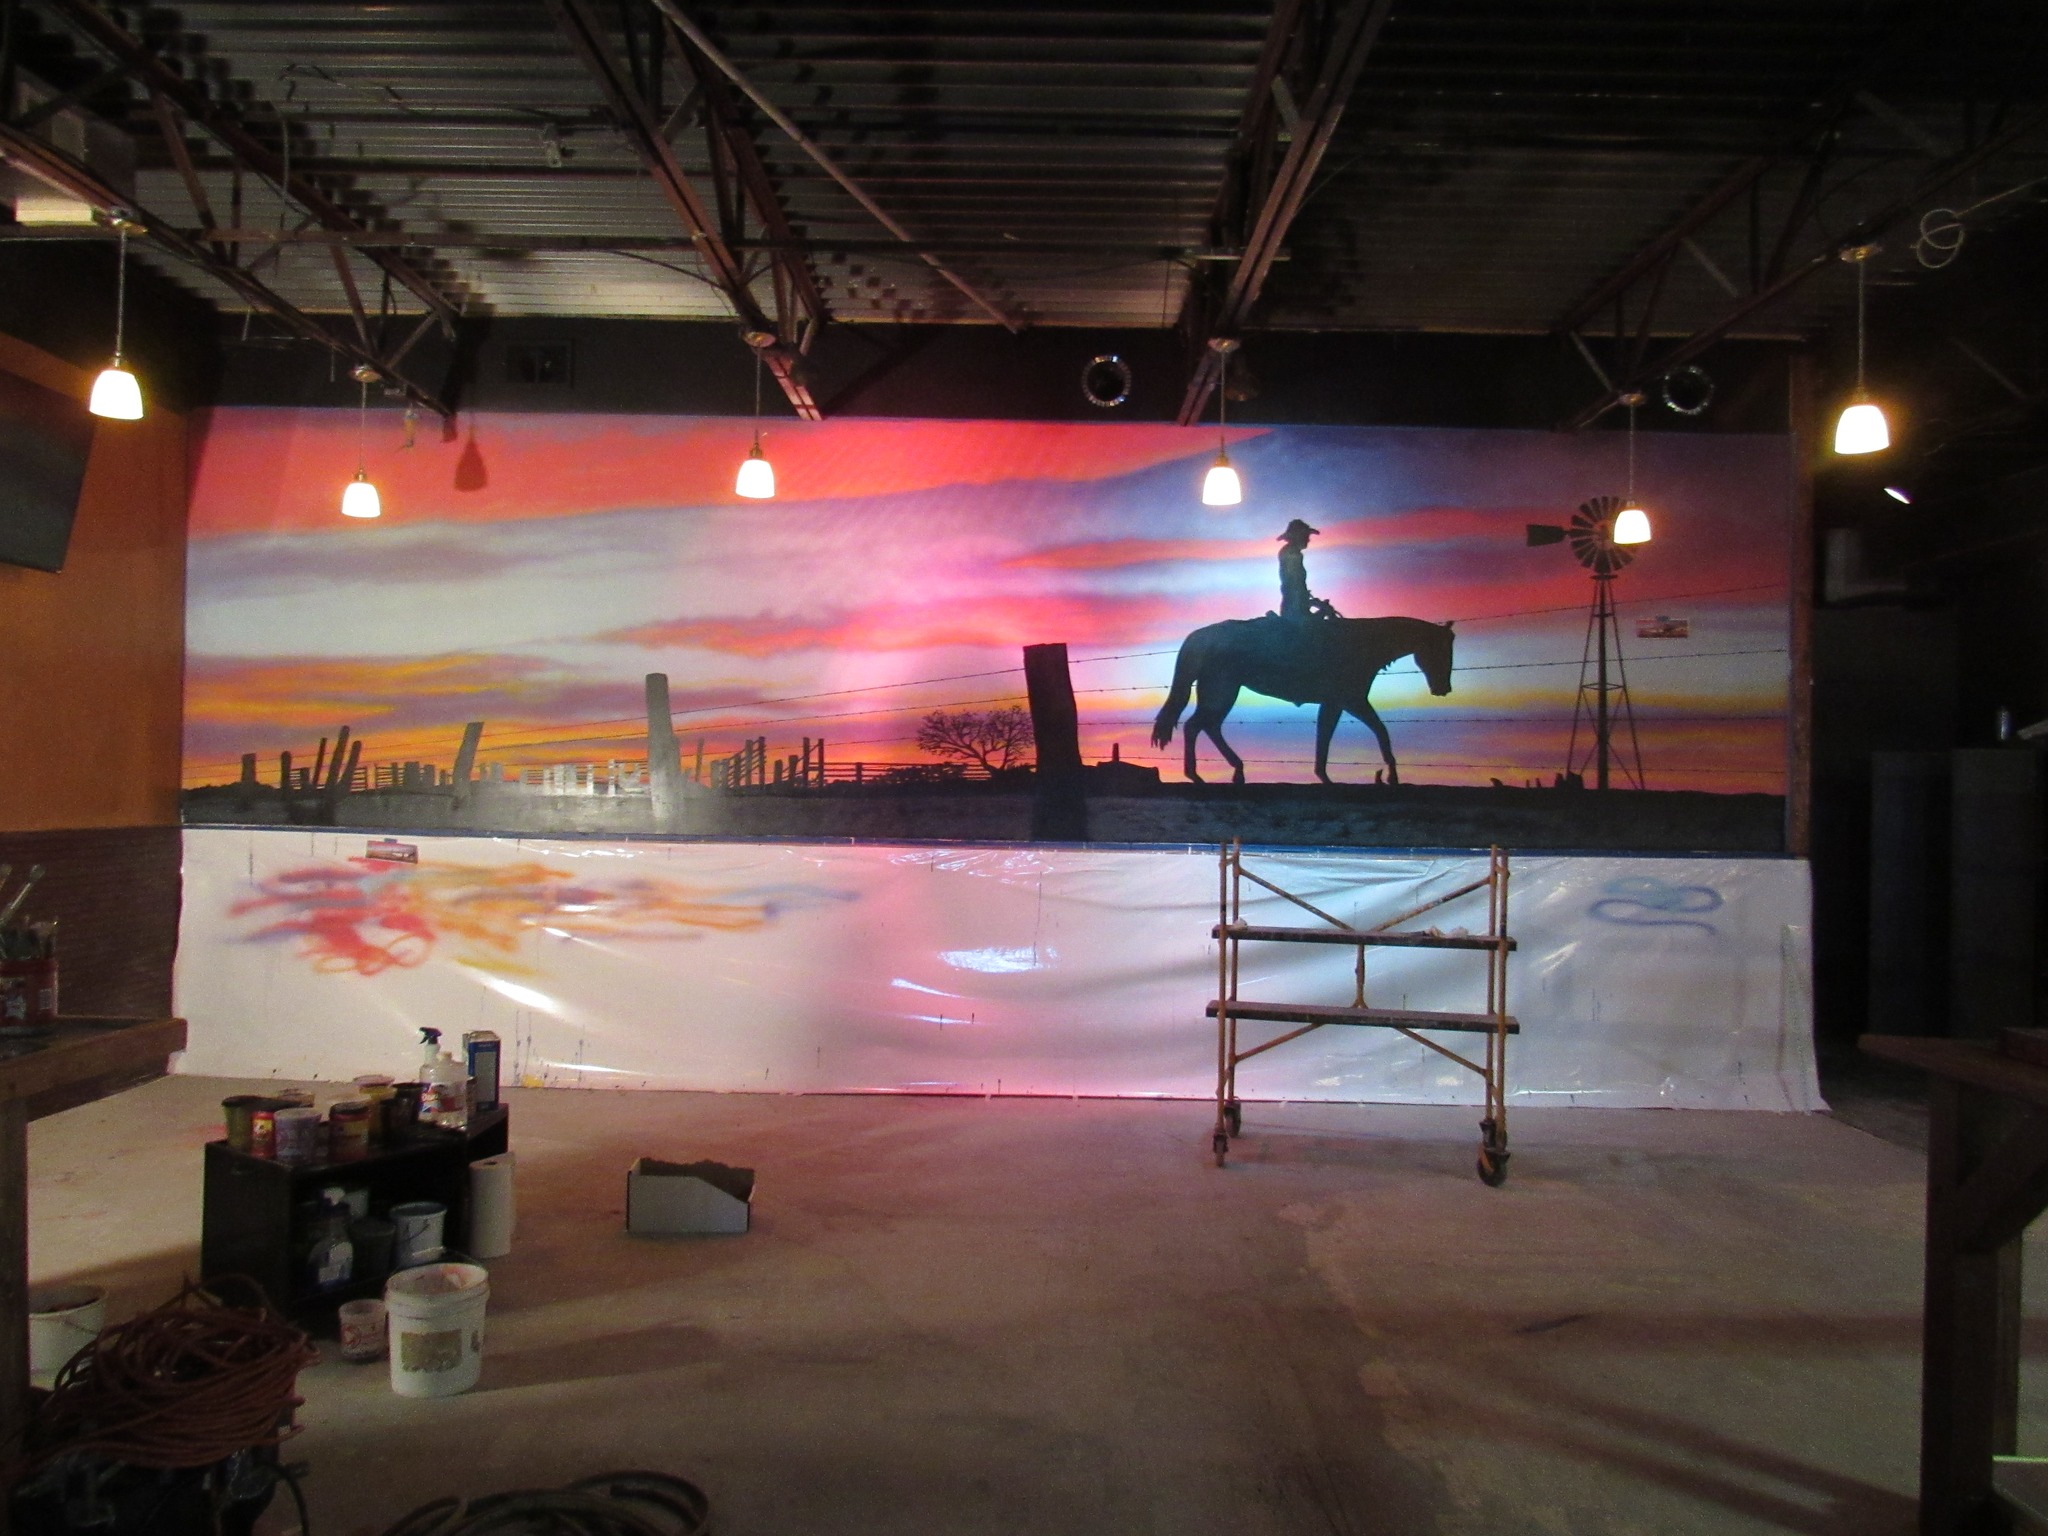 Mural painted for the Sunset Rodeo in Corpus Christi, Texas.